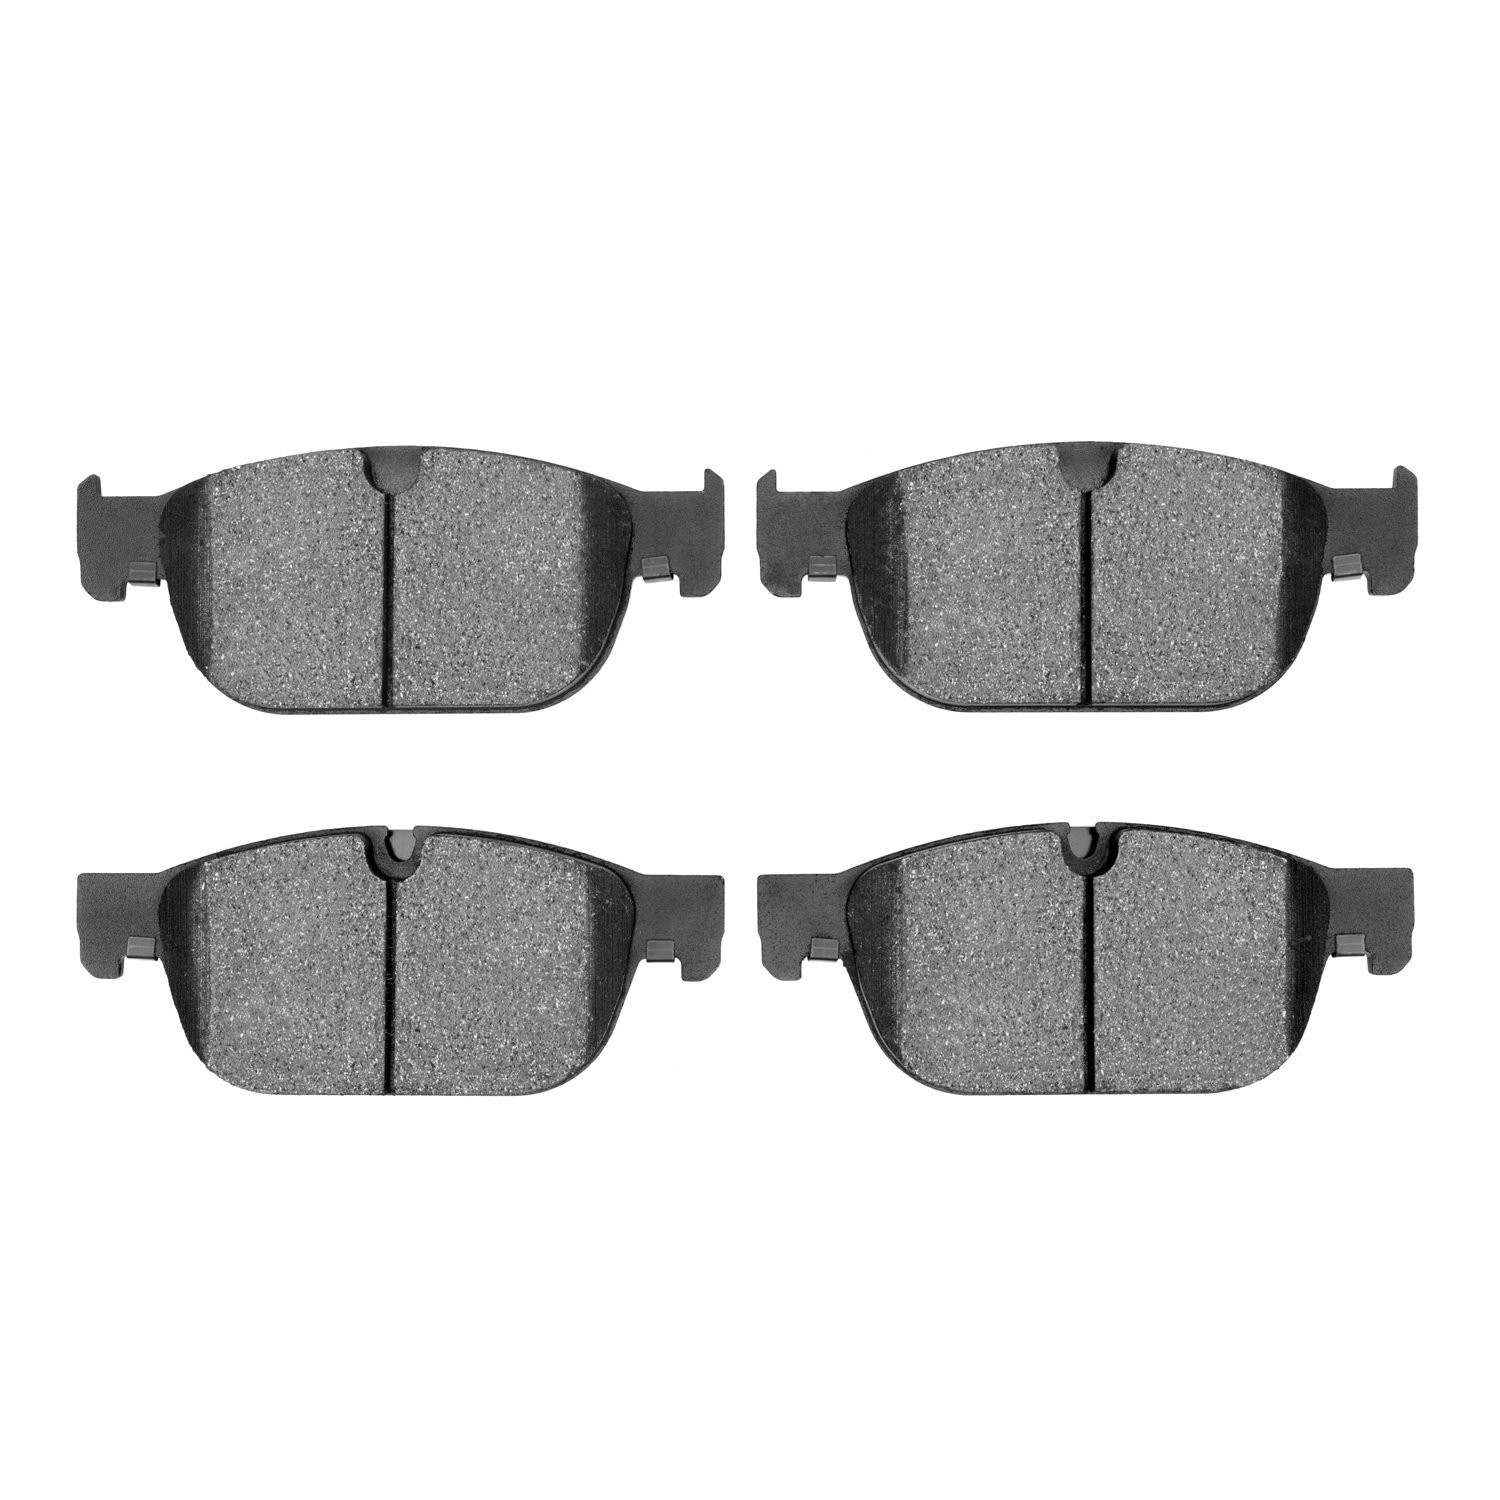 1311-1865-00 3000-Series Semi-Metallic Brake Pads, Fits Select Multiple Makes/Models, Position: Front